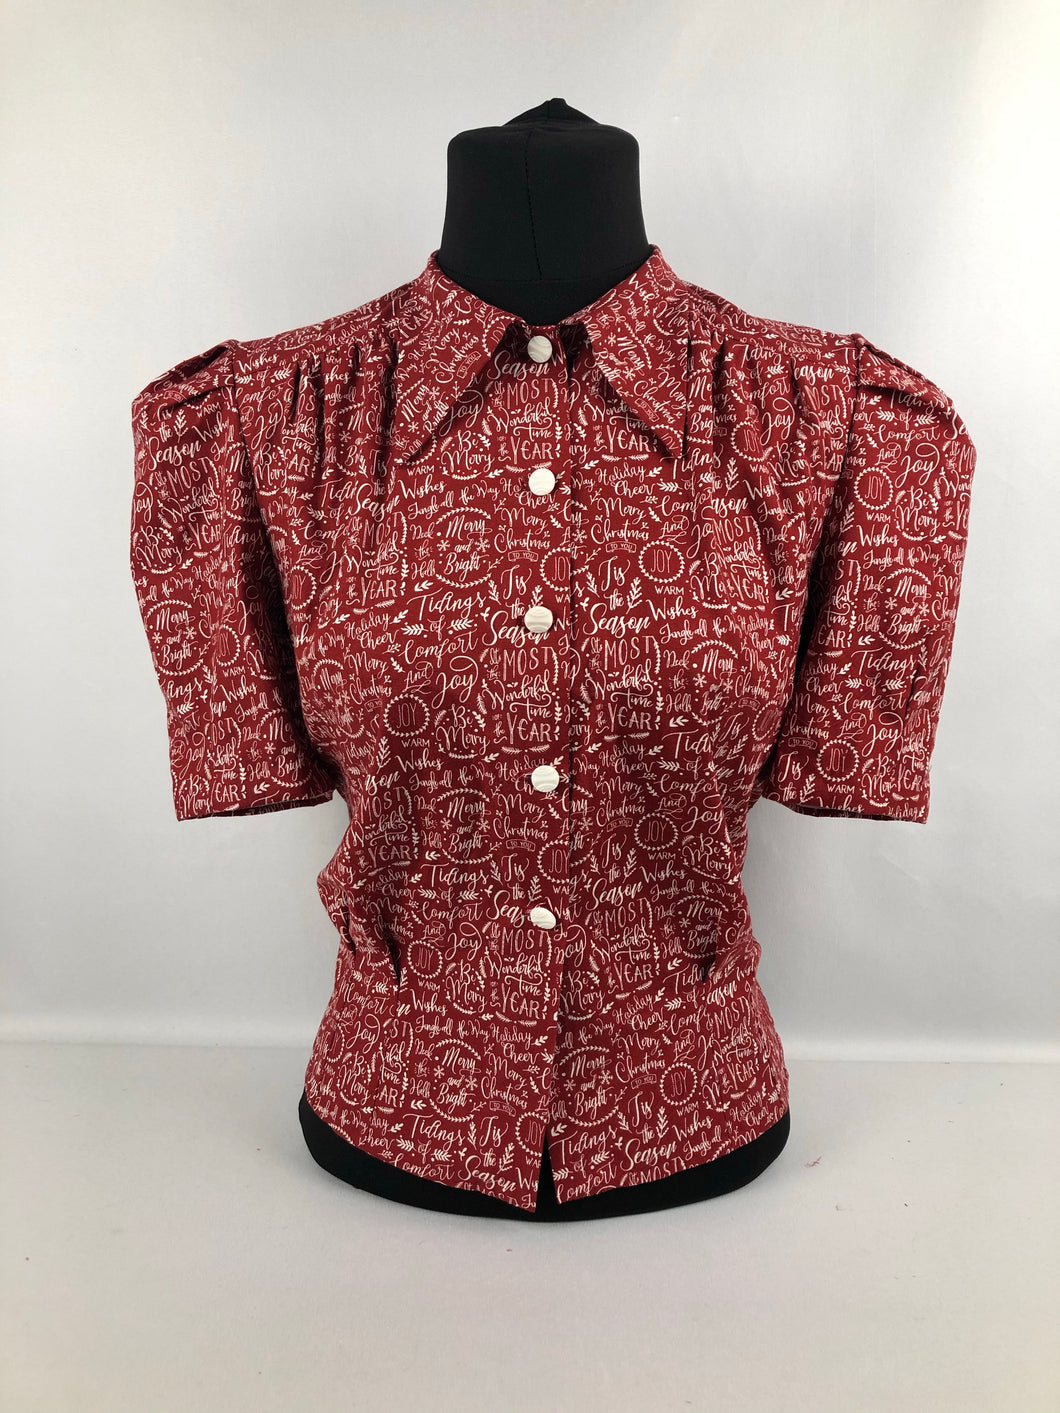 1940s Reproduction Christmas Blouse in Riley Blake Cotton - Bust 34